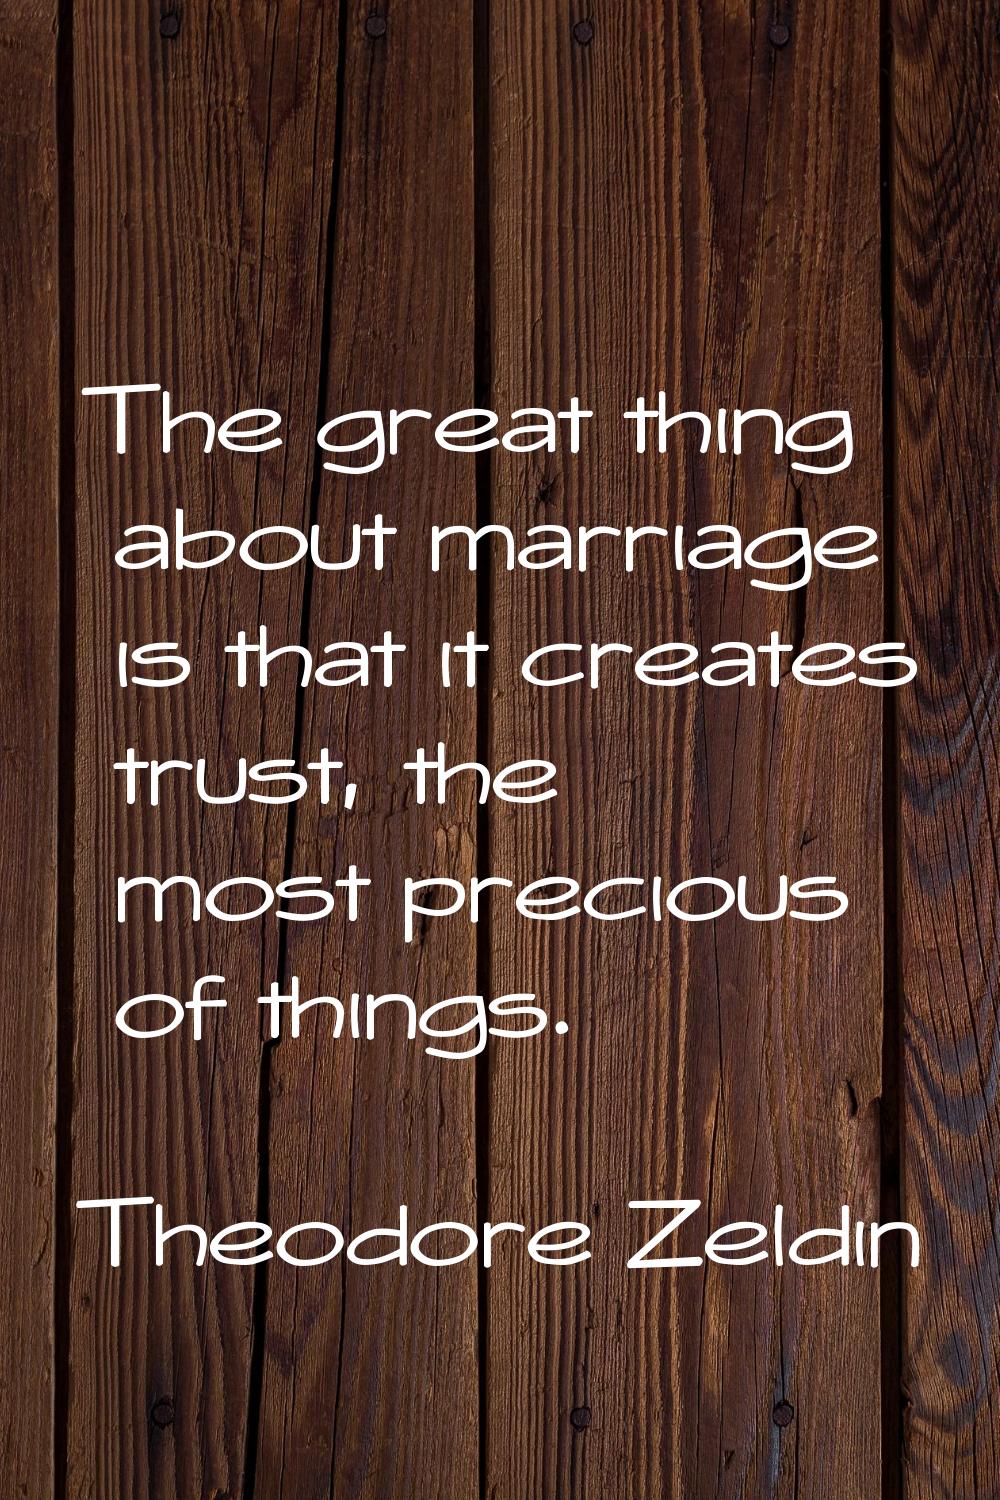 The great thing about marriage is that it creates trust, the most precious of things.